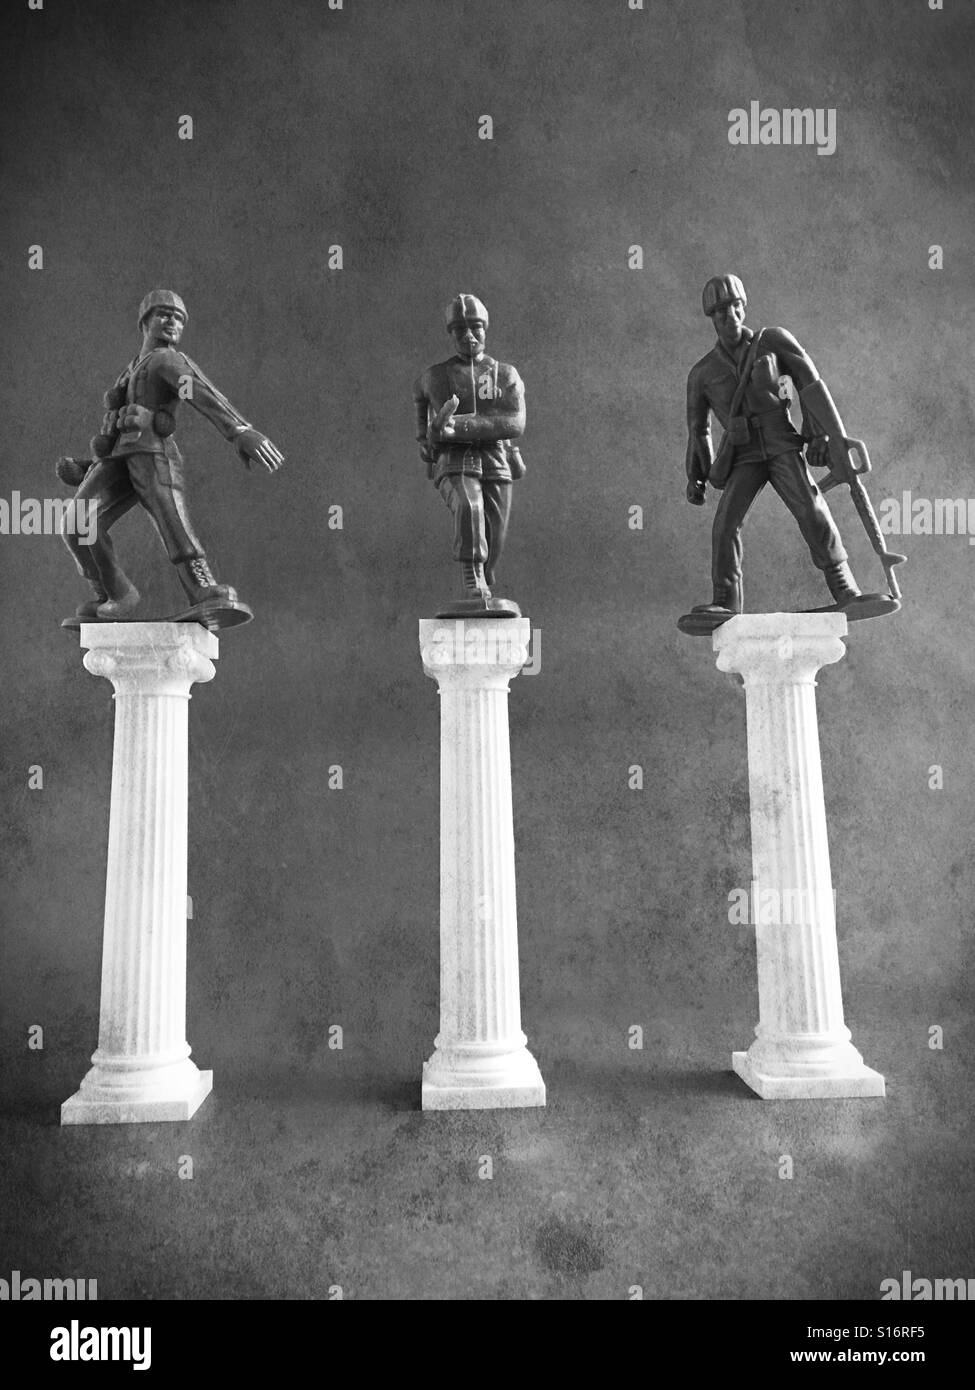 Toy soldiers on pedestals. Stock Photo